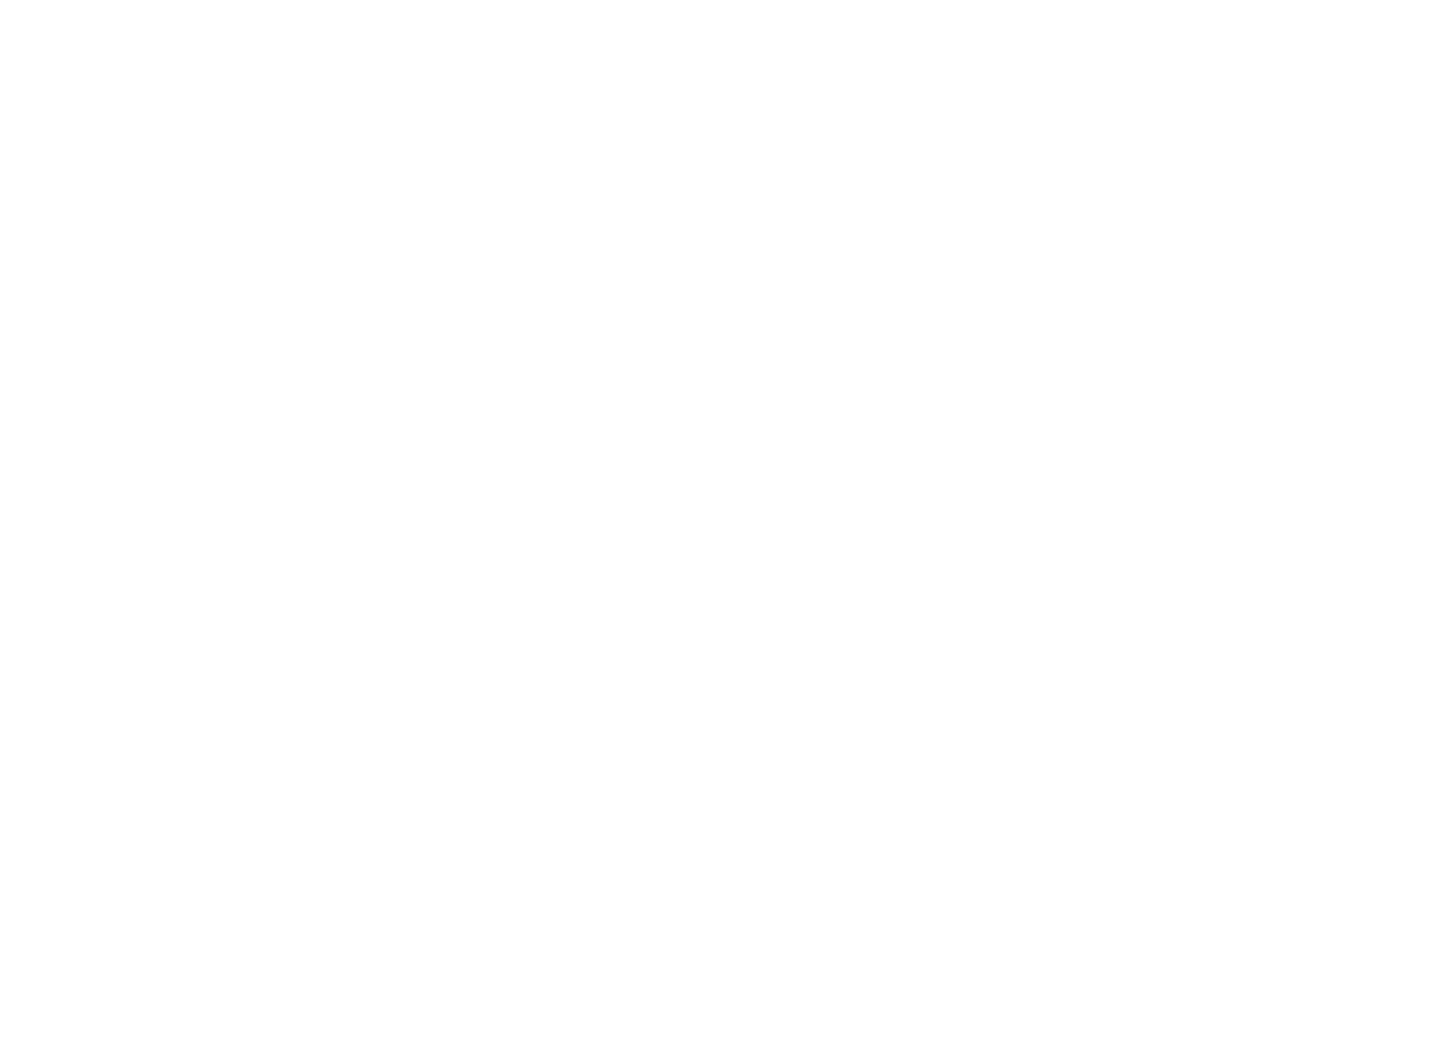 Shared Value Solutions